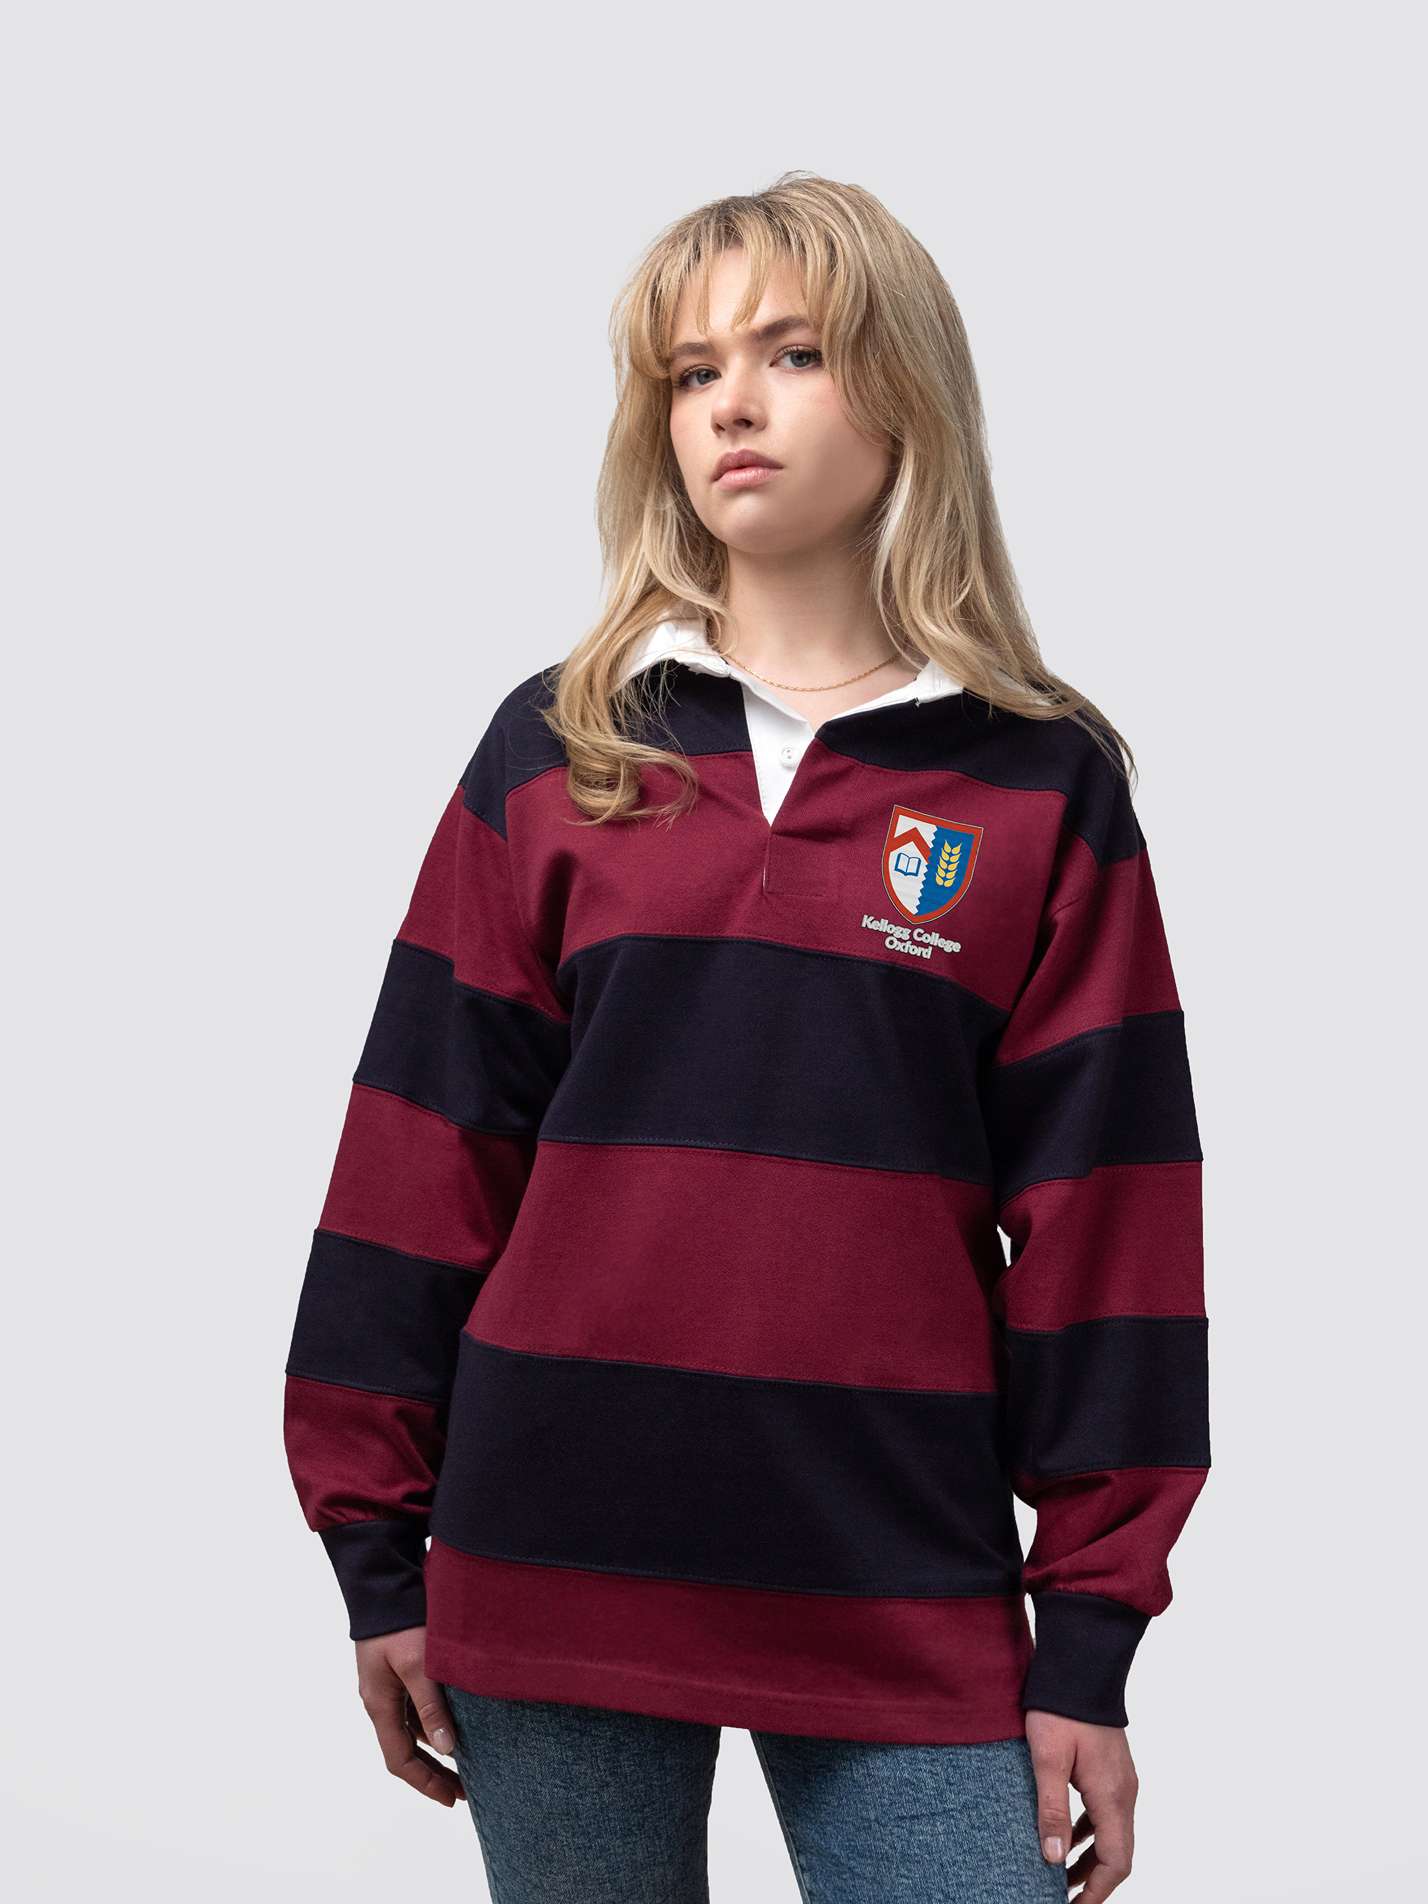 Kellogg College rugby shirt, with burgundy and navy stripes